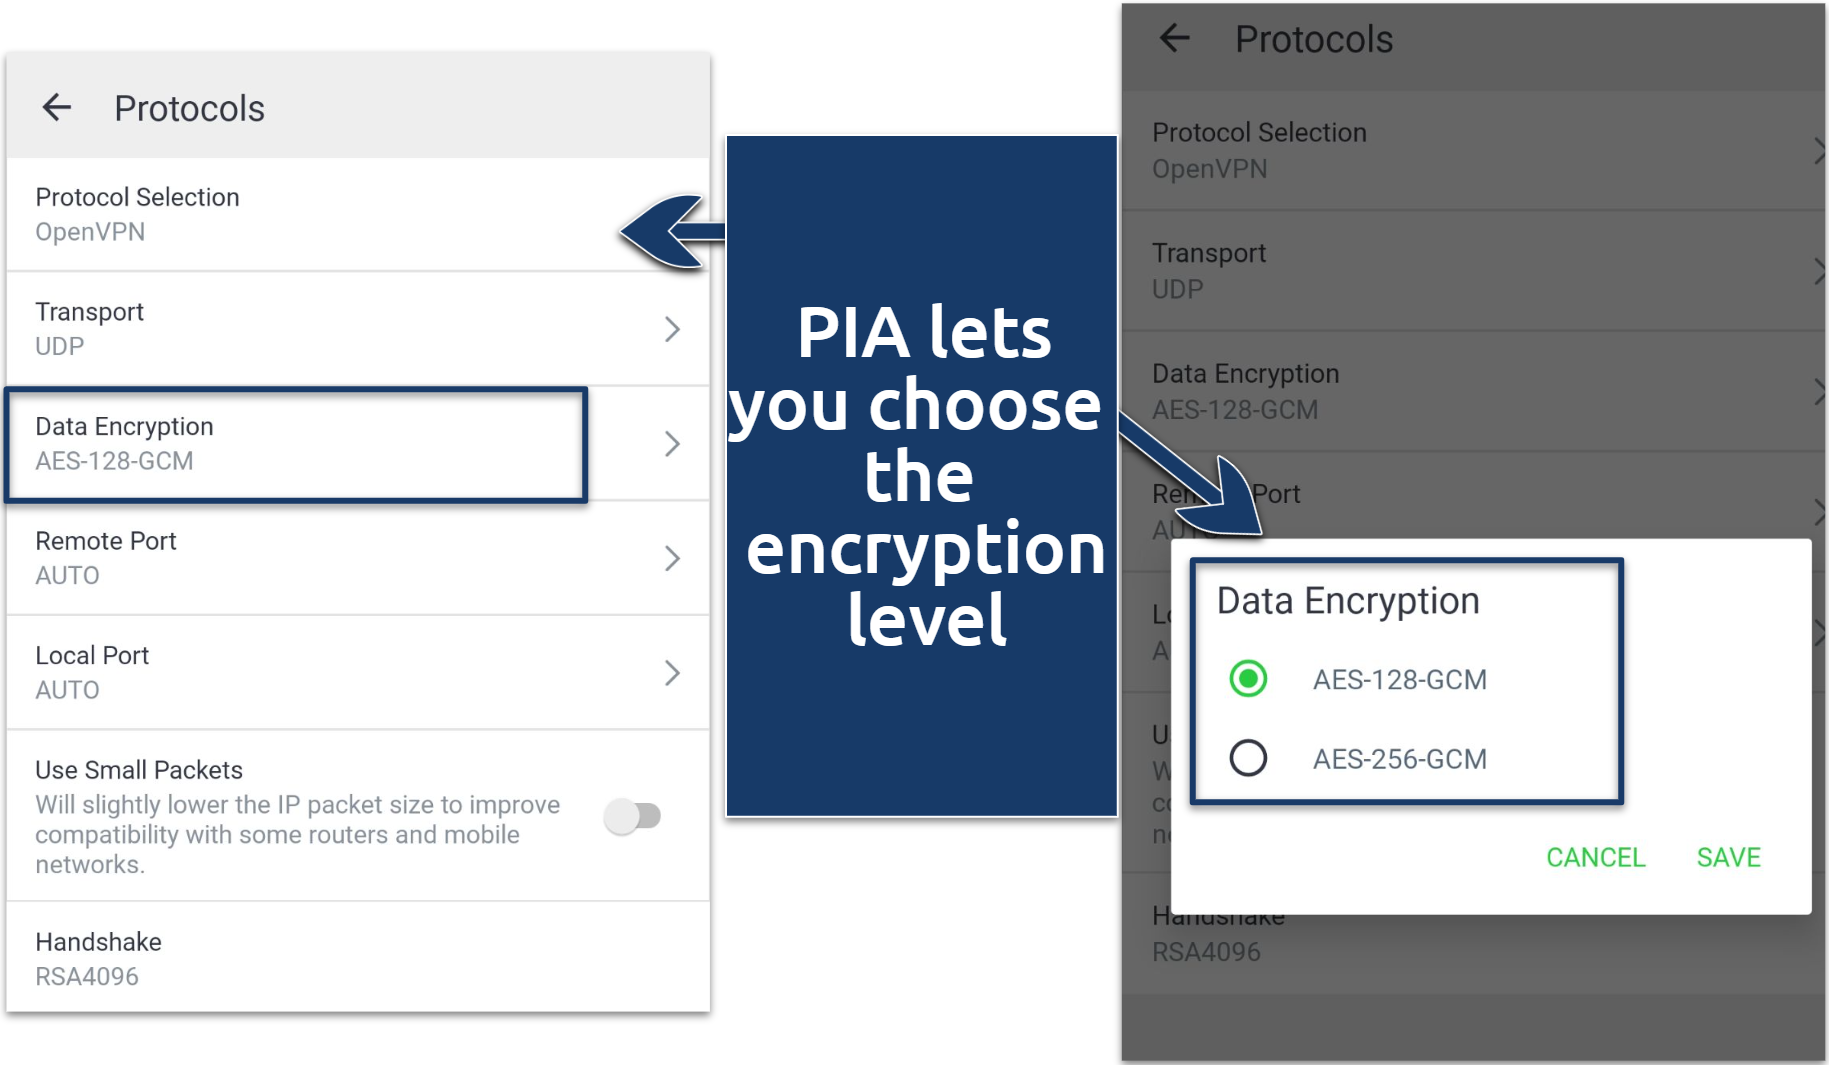 Screenshots of the PIA app showing security settings